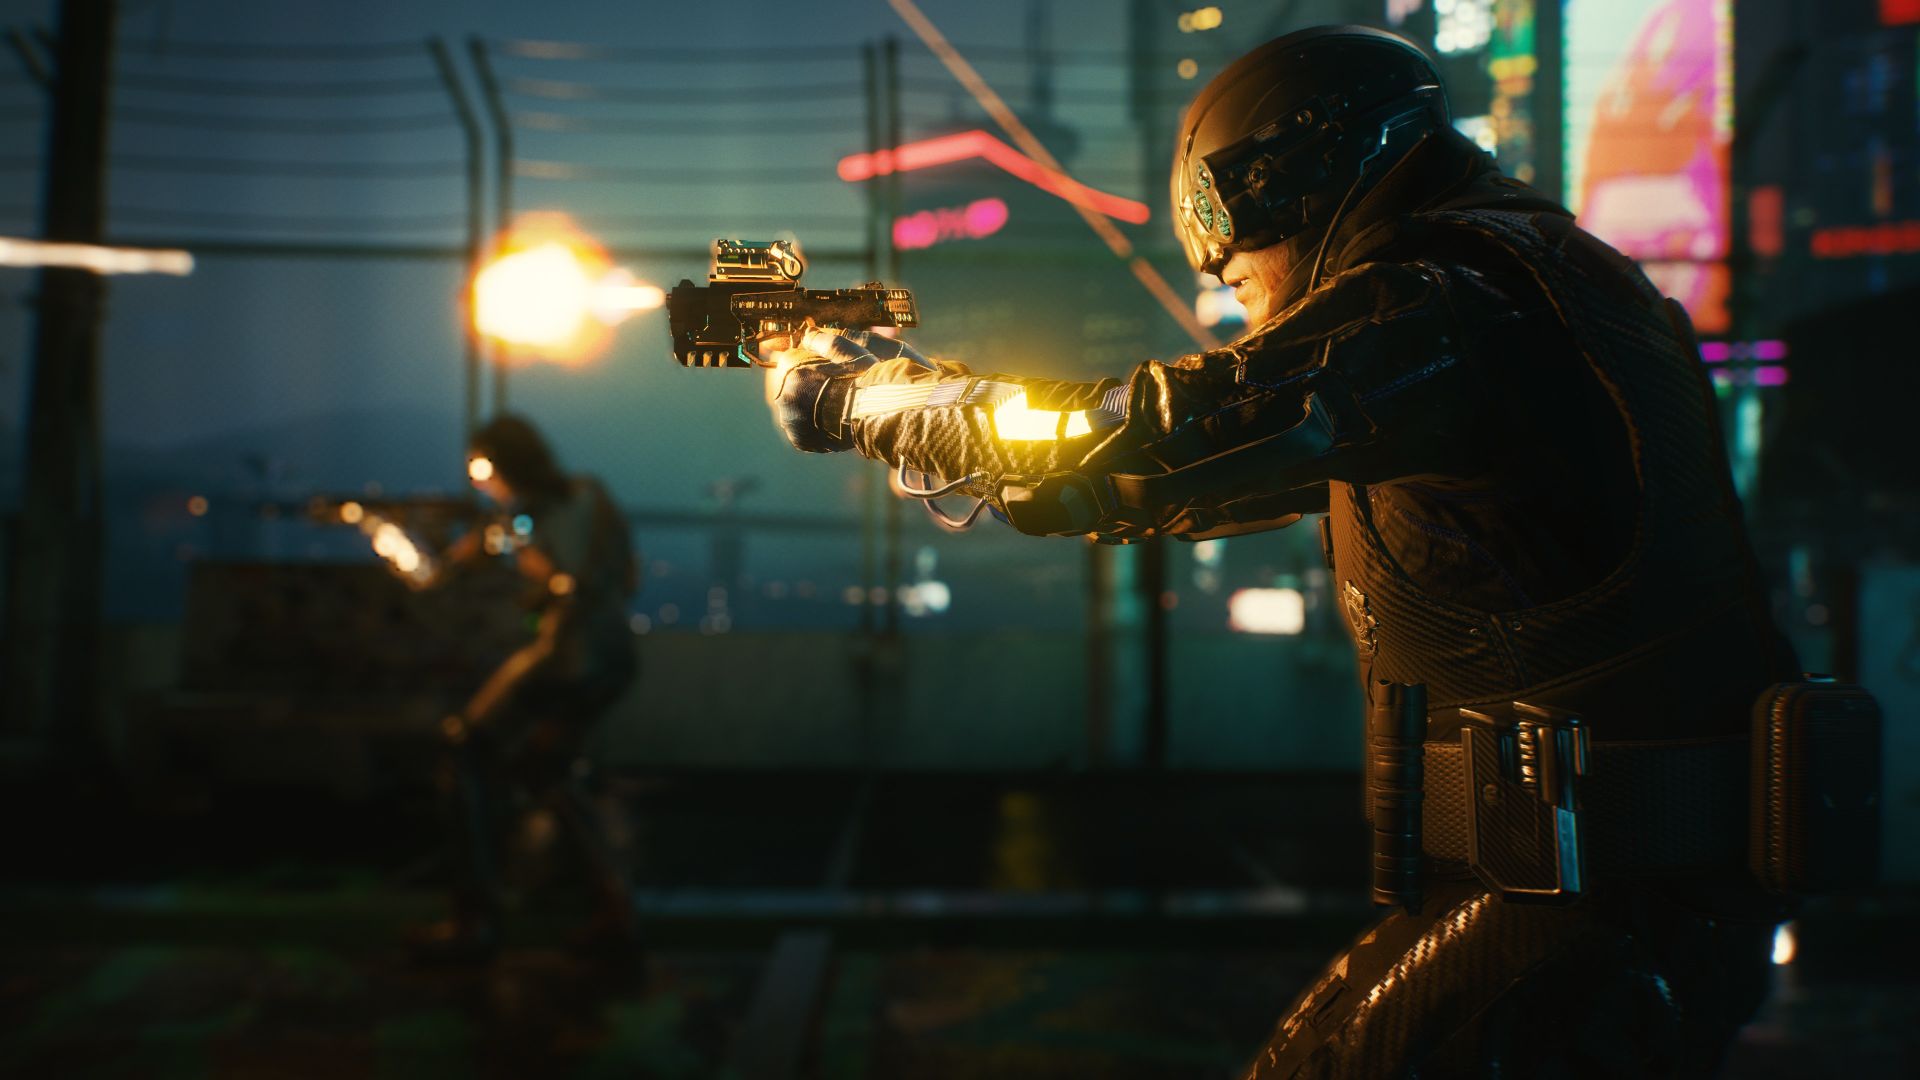 Cyberpunk 2077’s Steam User Reviews Are Now “Very Positive”